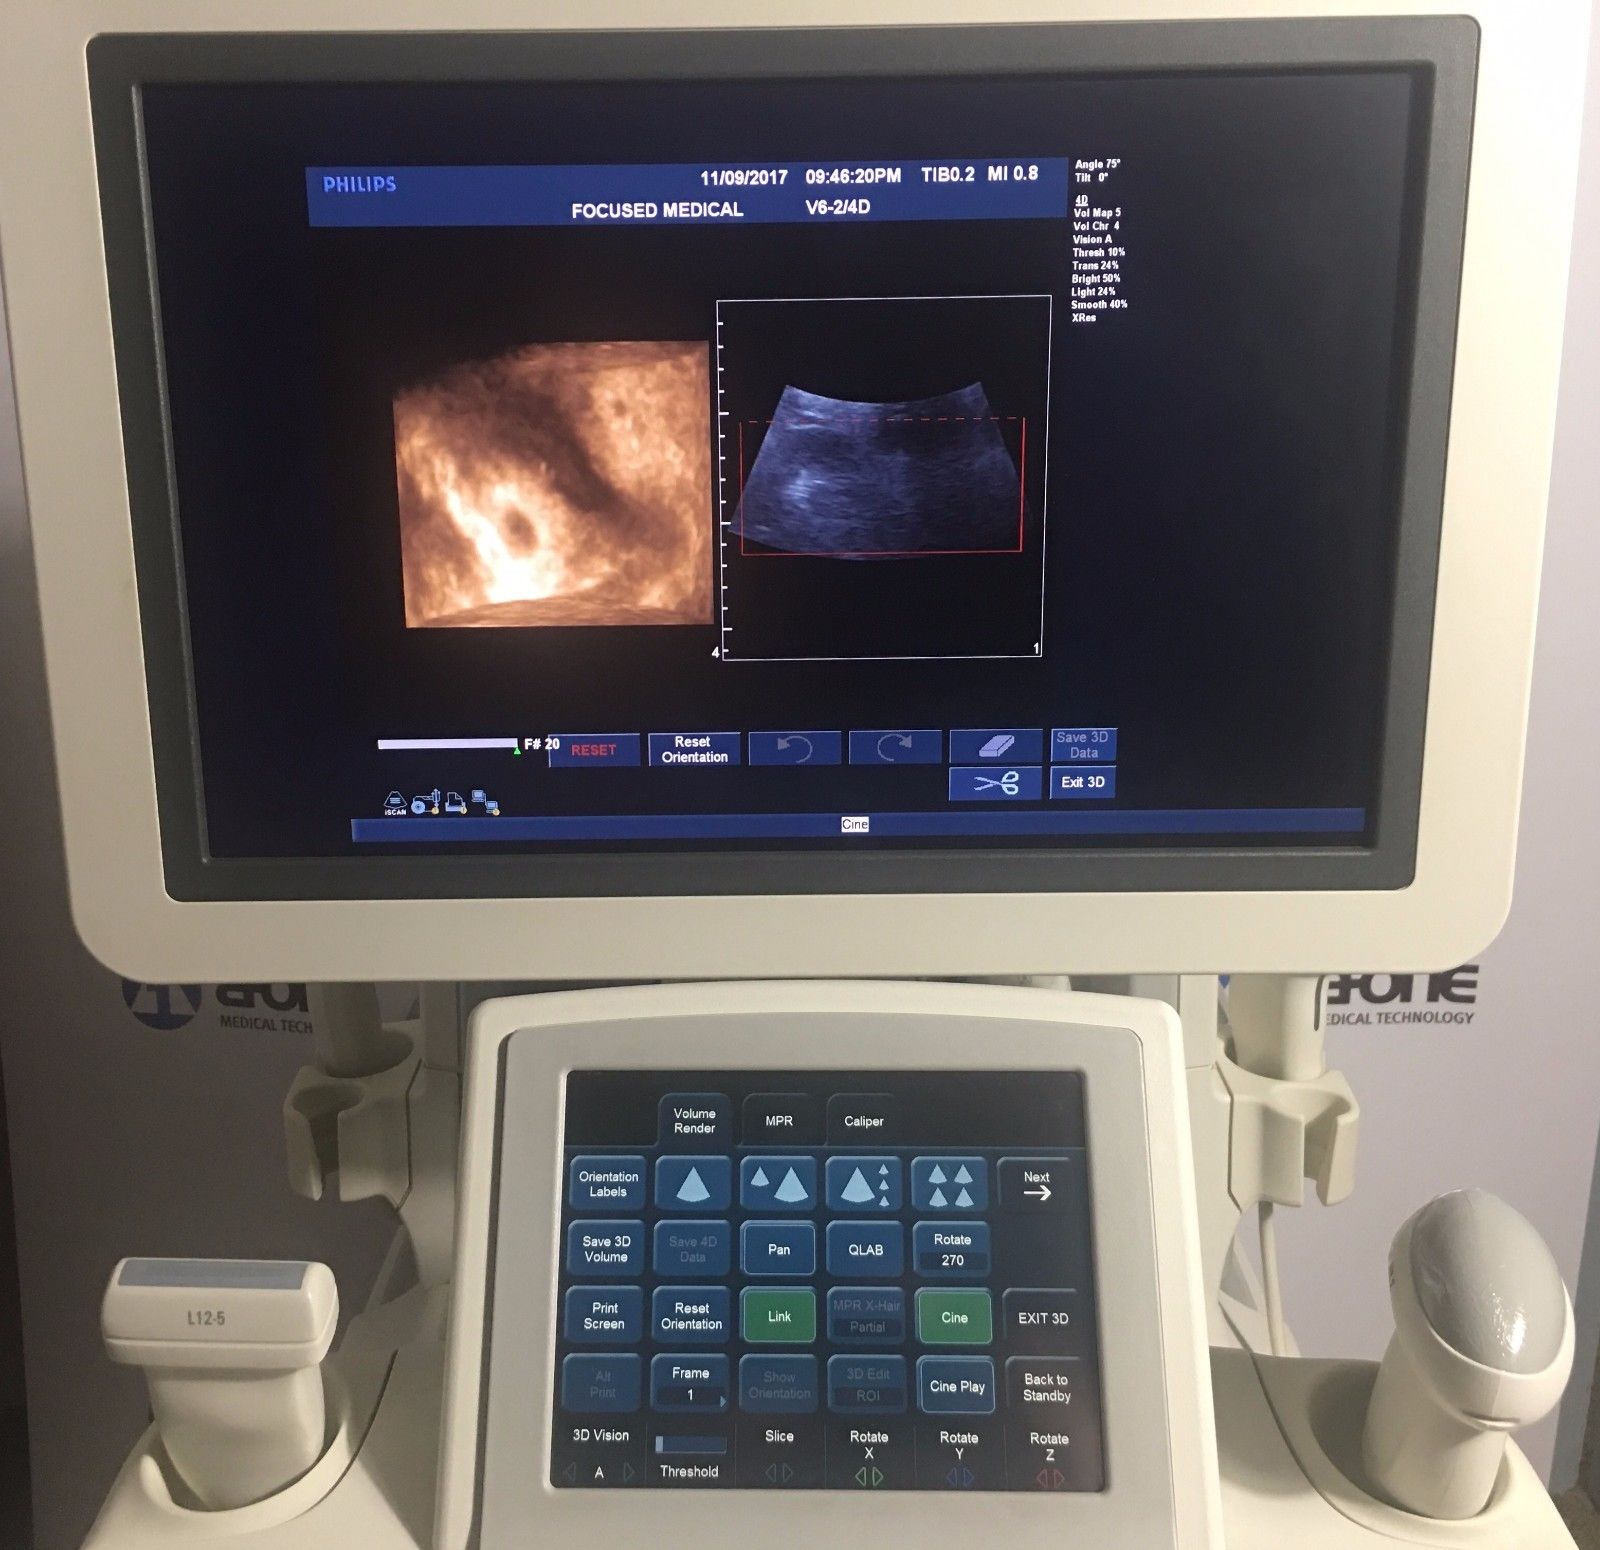 Philips IU22 3D/4D Ultrasound System with 4 Probes Cart#E  "Excellent Condition"